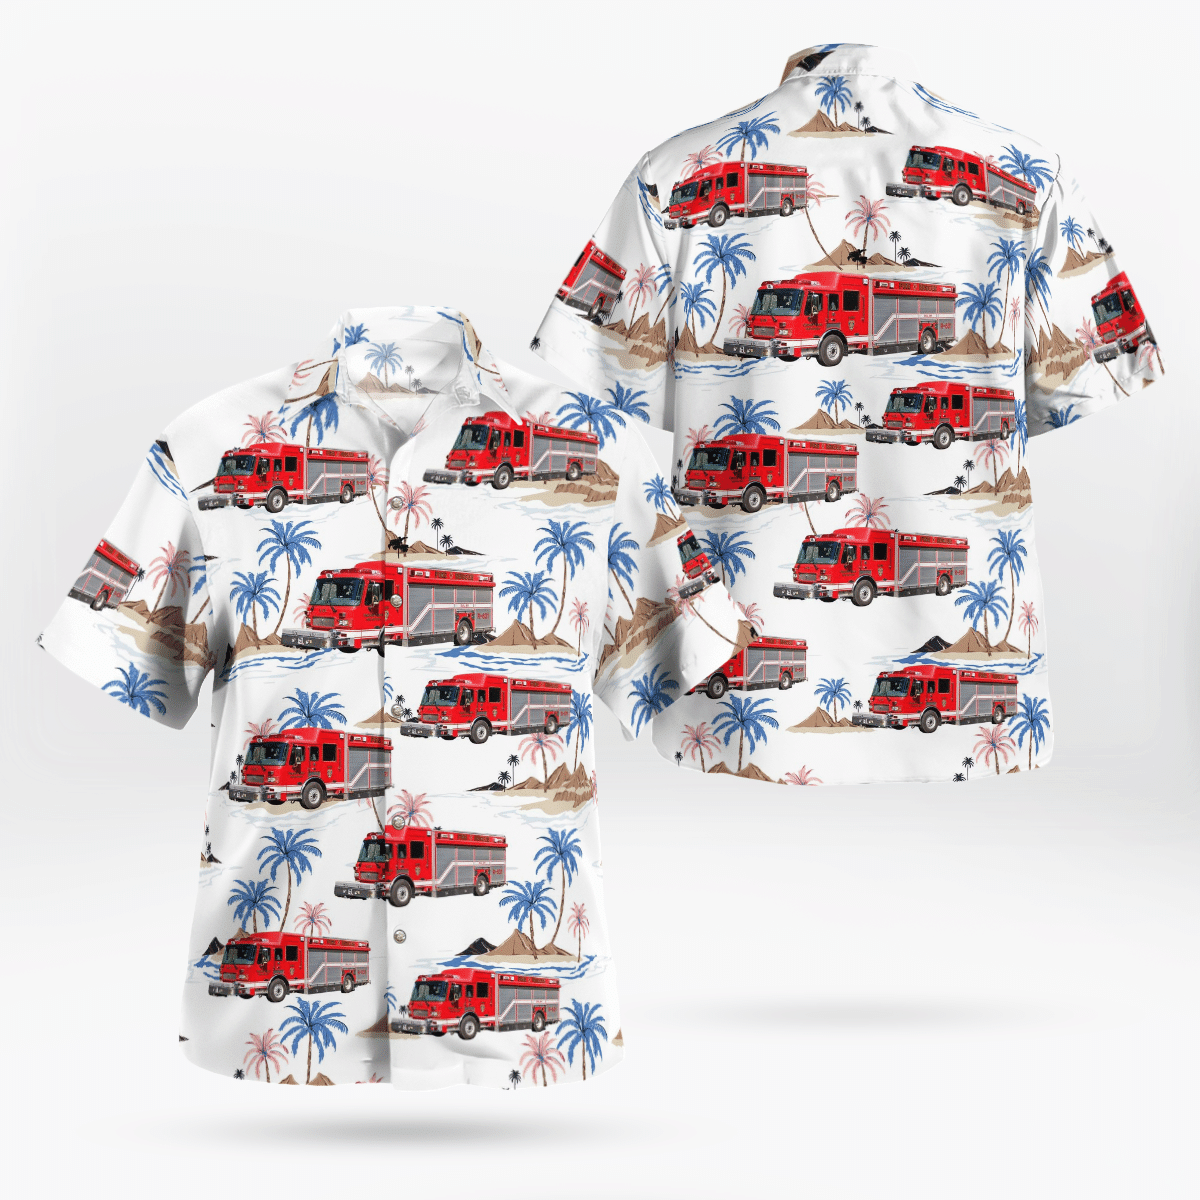 Shop now to find the perfect Hawaii Shirt for your hobby 30